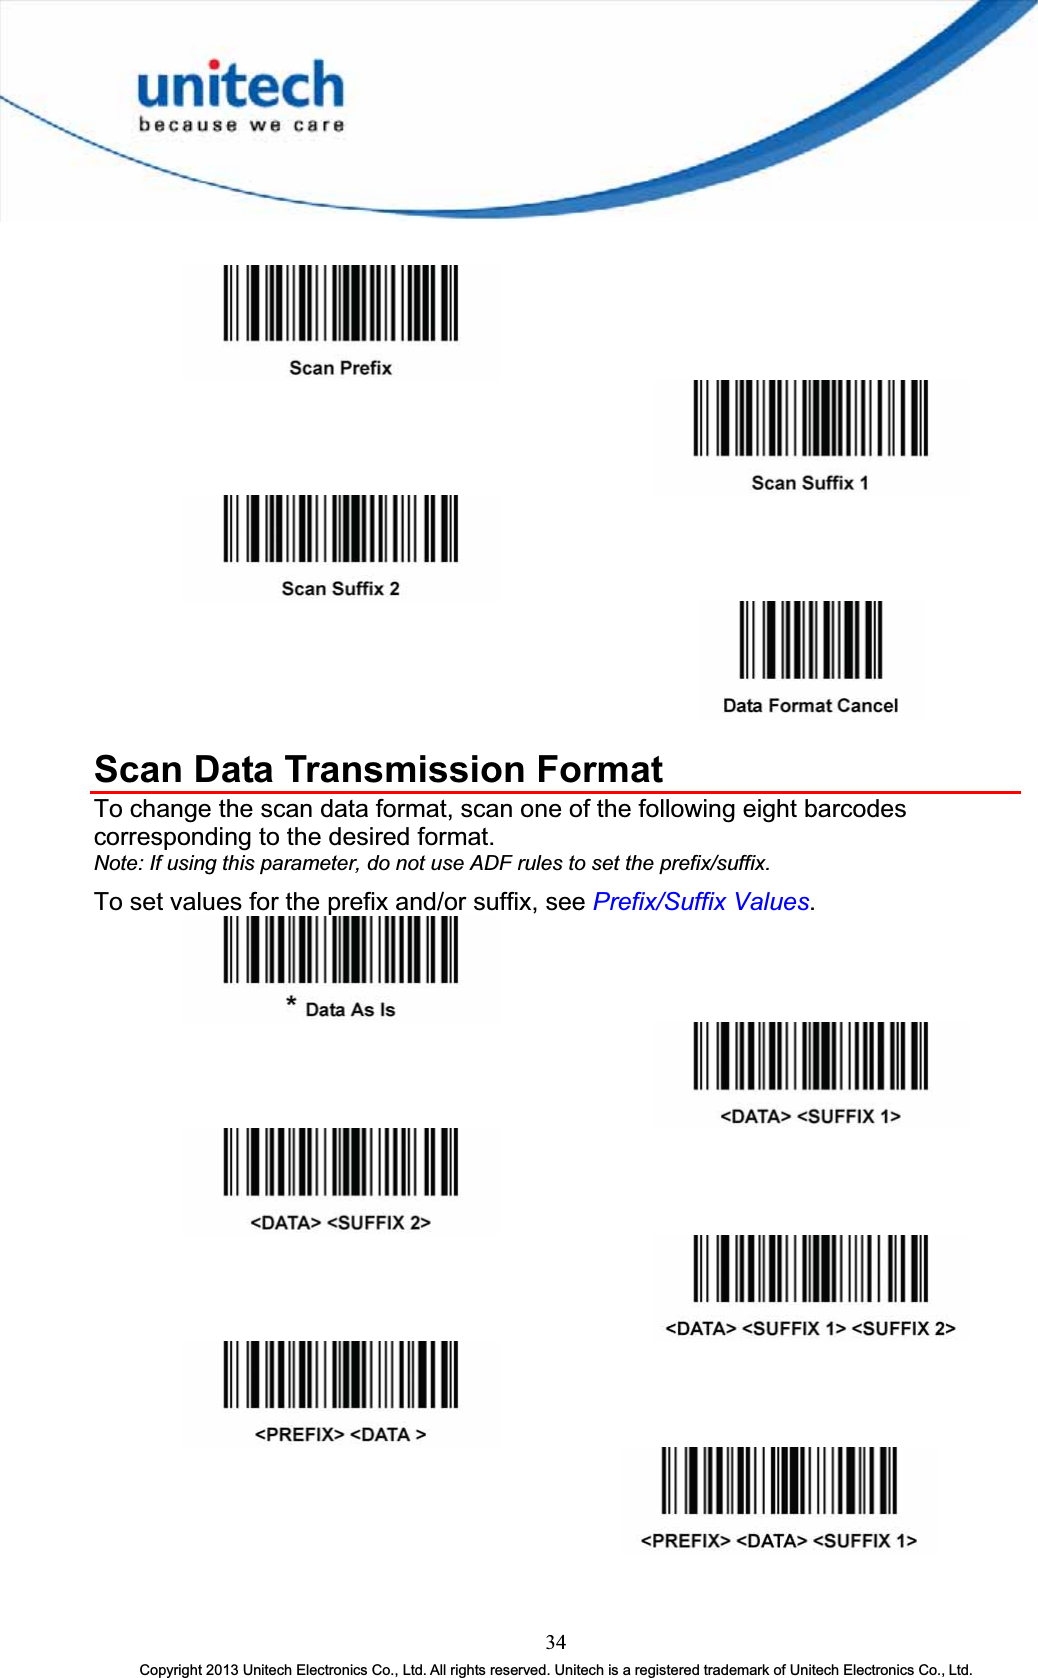 Scan Data Transmission Format To change the scan data format, scan one of the following eight barcodes corresponding to the desired format. Note: If using this parameter, do not use ADF rules to set the prefix/suffix.To set values for the prefix and/or suffix, see Prefix/Suffix Values.34Copyright 2013 Unitech Electronics Co., Ltd. All rights reserved. Unitech is a registered trademark of Unitech Electronics Co., Ltd. 